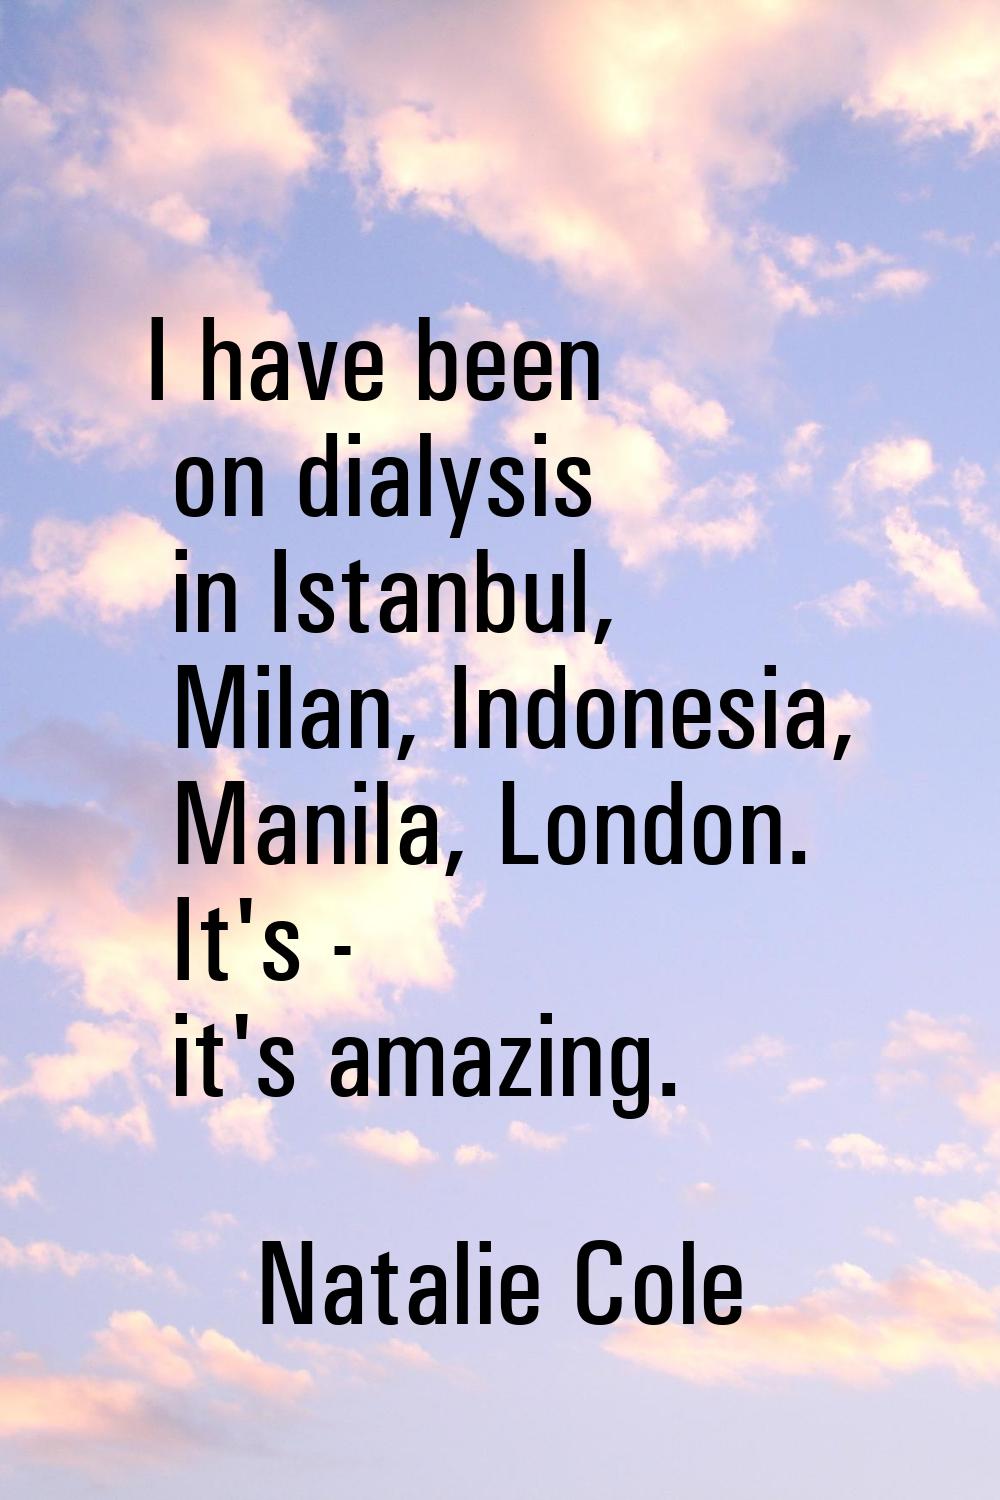 I have been on dialysis in Istanbul, Milan, Indonesia, Manila, London. It's - it's amazing.